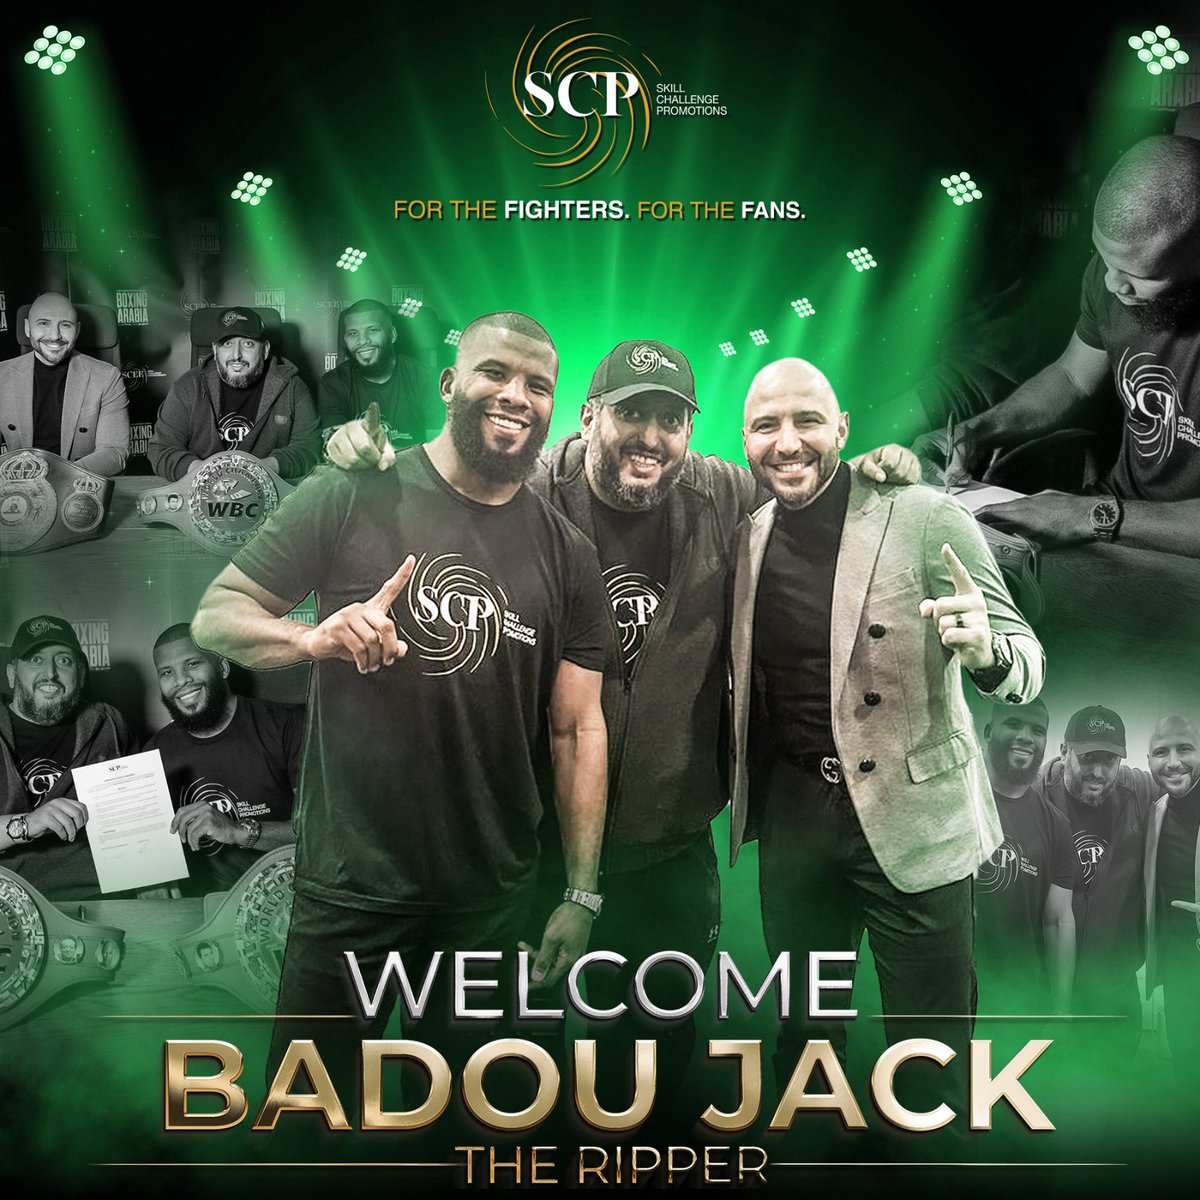 Welcome to the family @BadouJack! @Bigkaf #ForTheFIGHTERS #ForTheFANS #SCP 🇸🇦